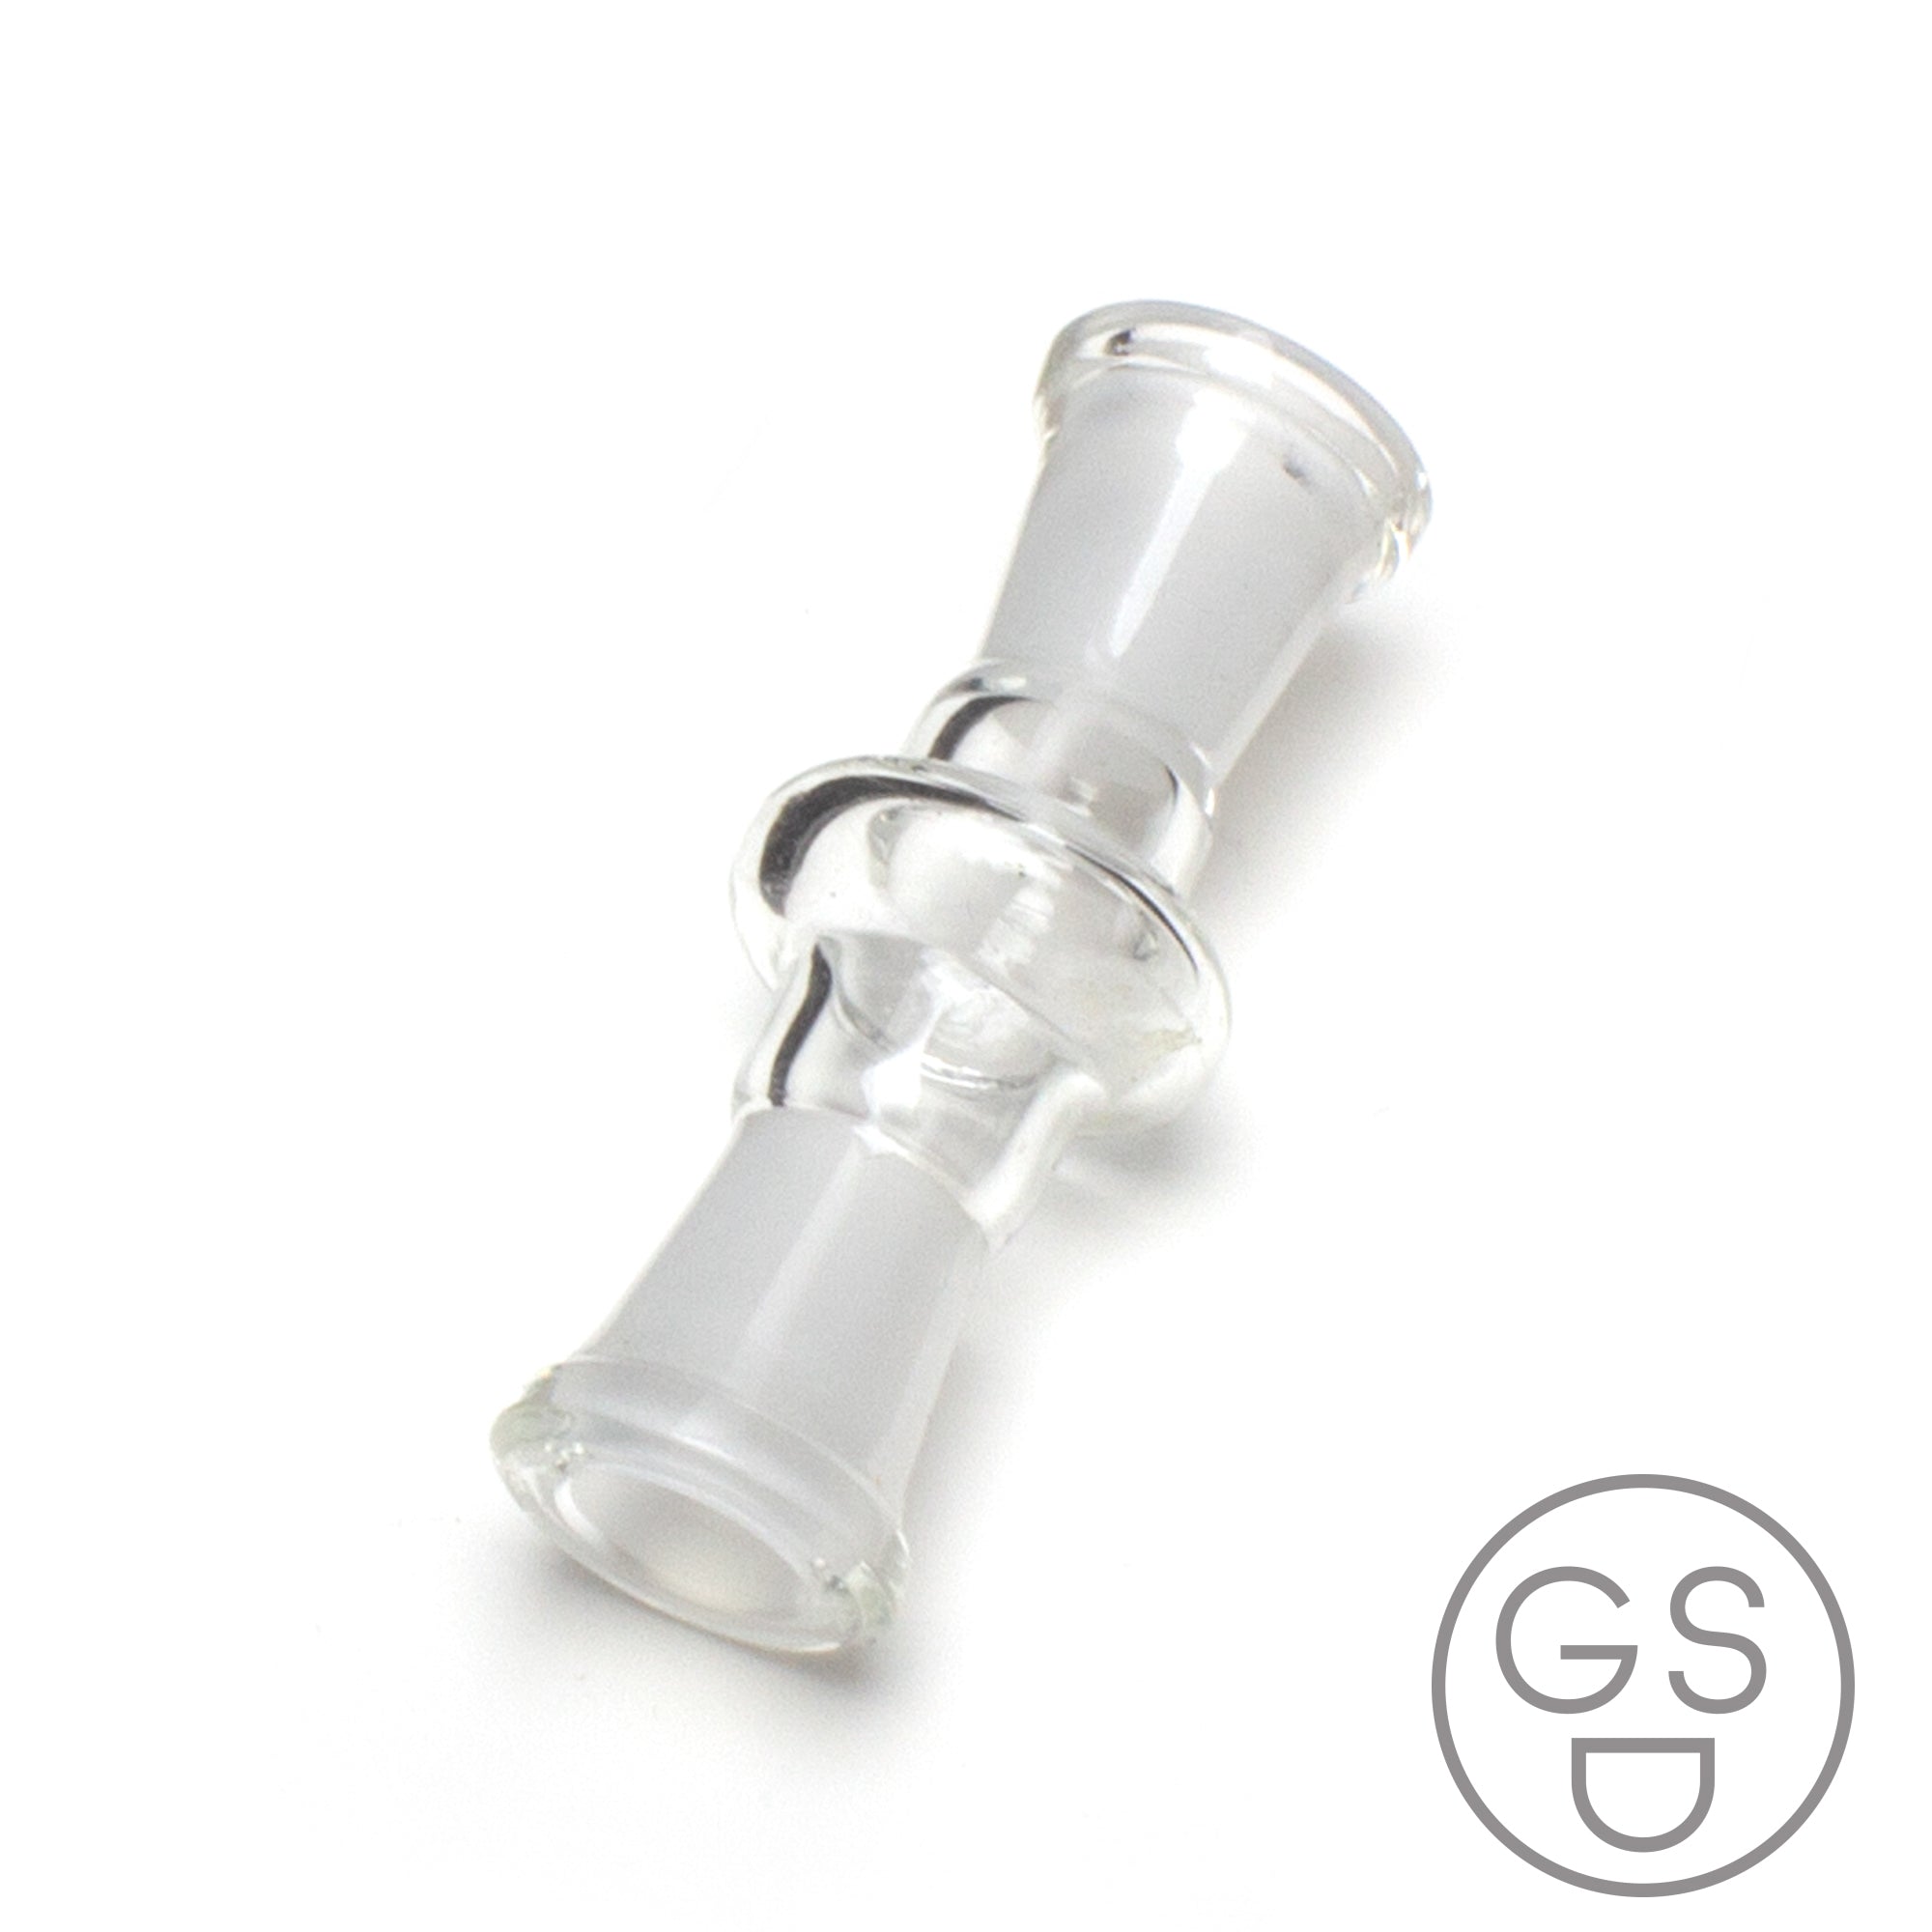 Female To Female Glass Adapter